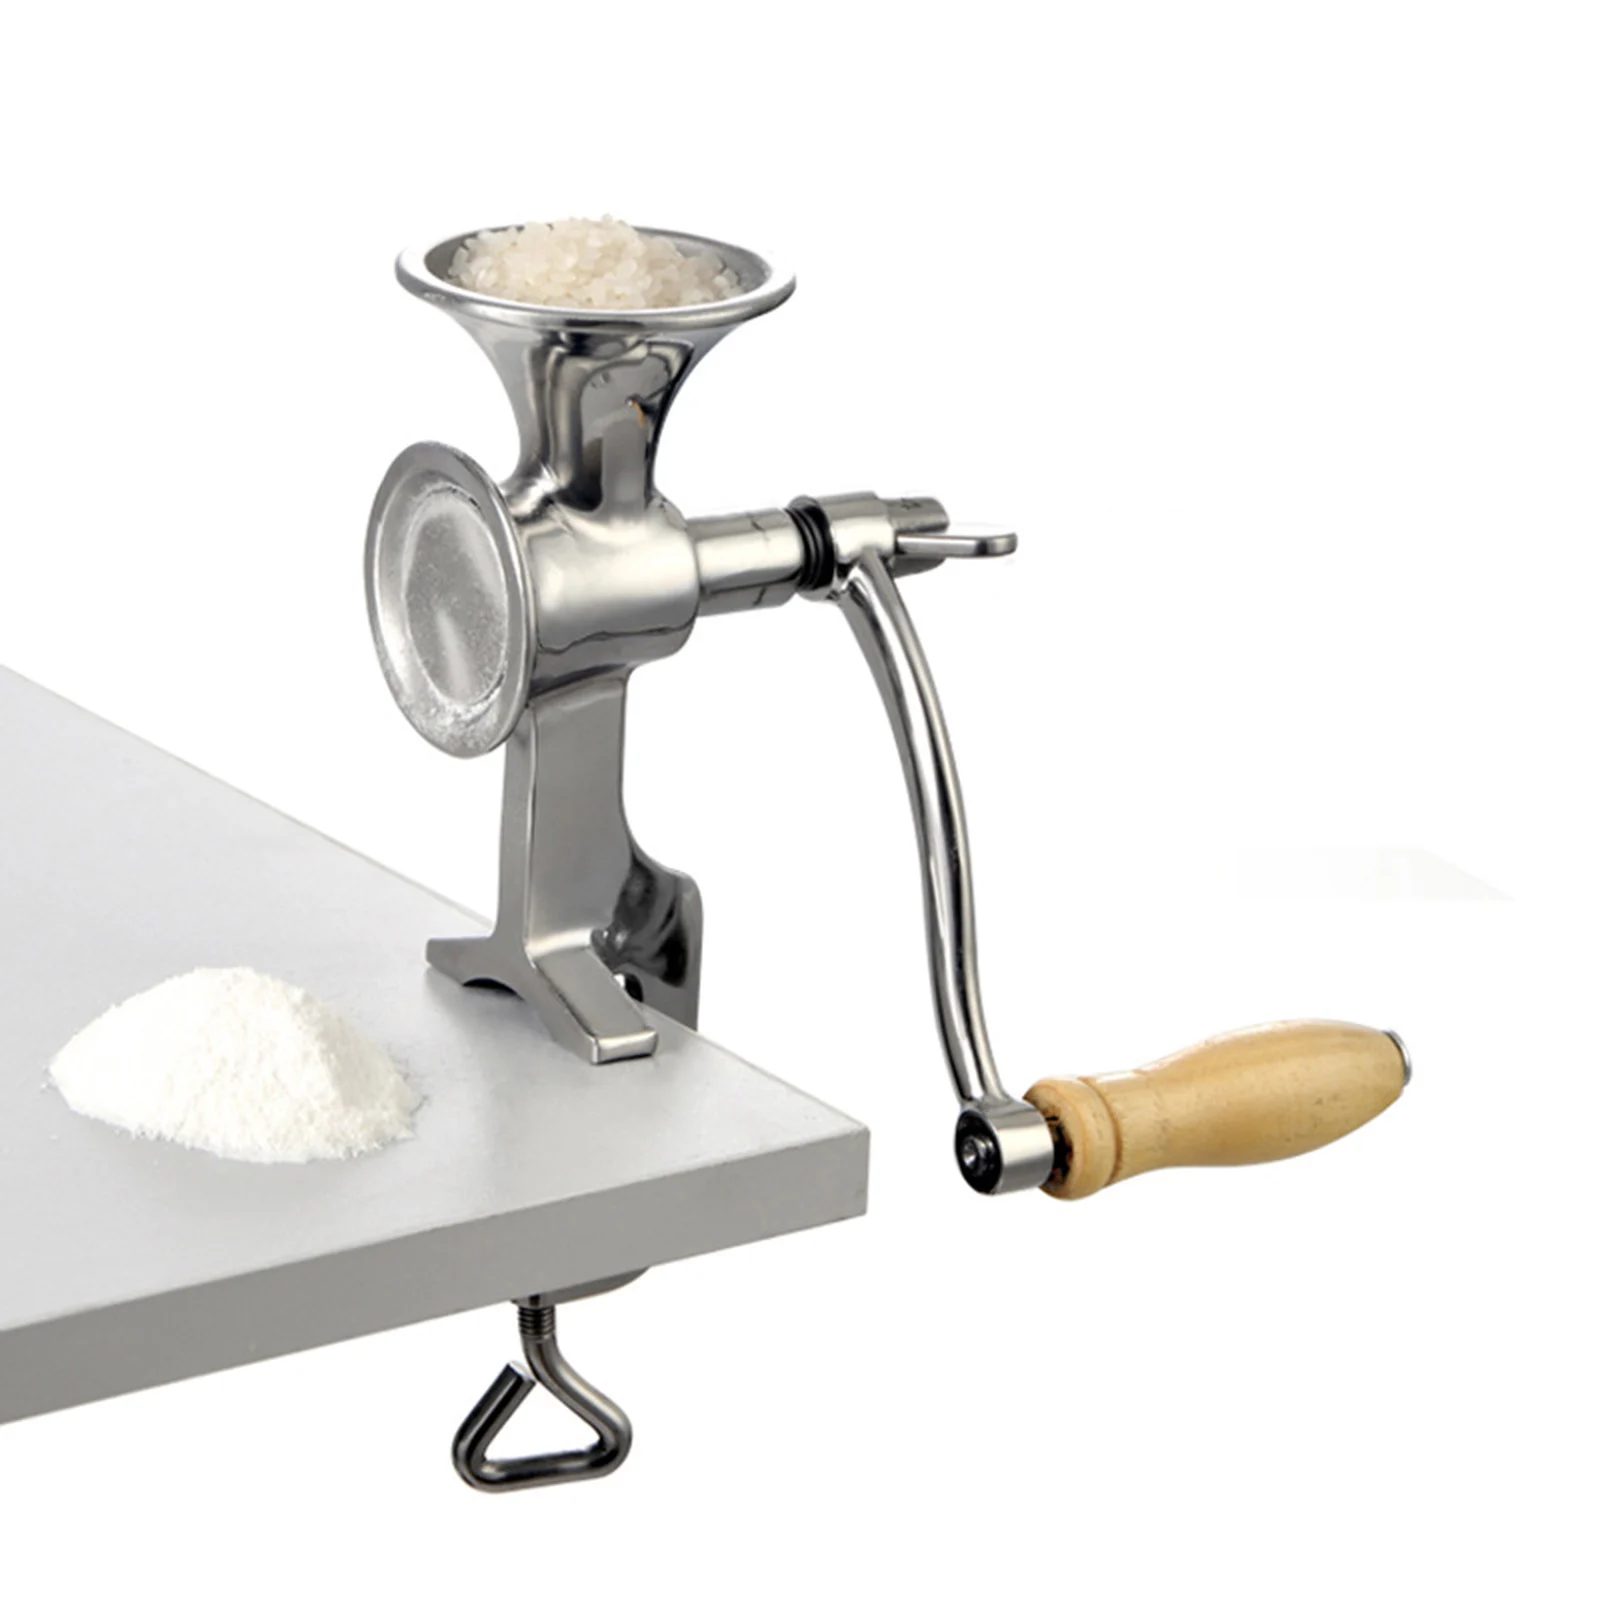 Hand Crank Grain Mill Table Clamp Stainless Steel Manual Grain Grinder for Grinding Home Commercial Use with Wooden Handle